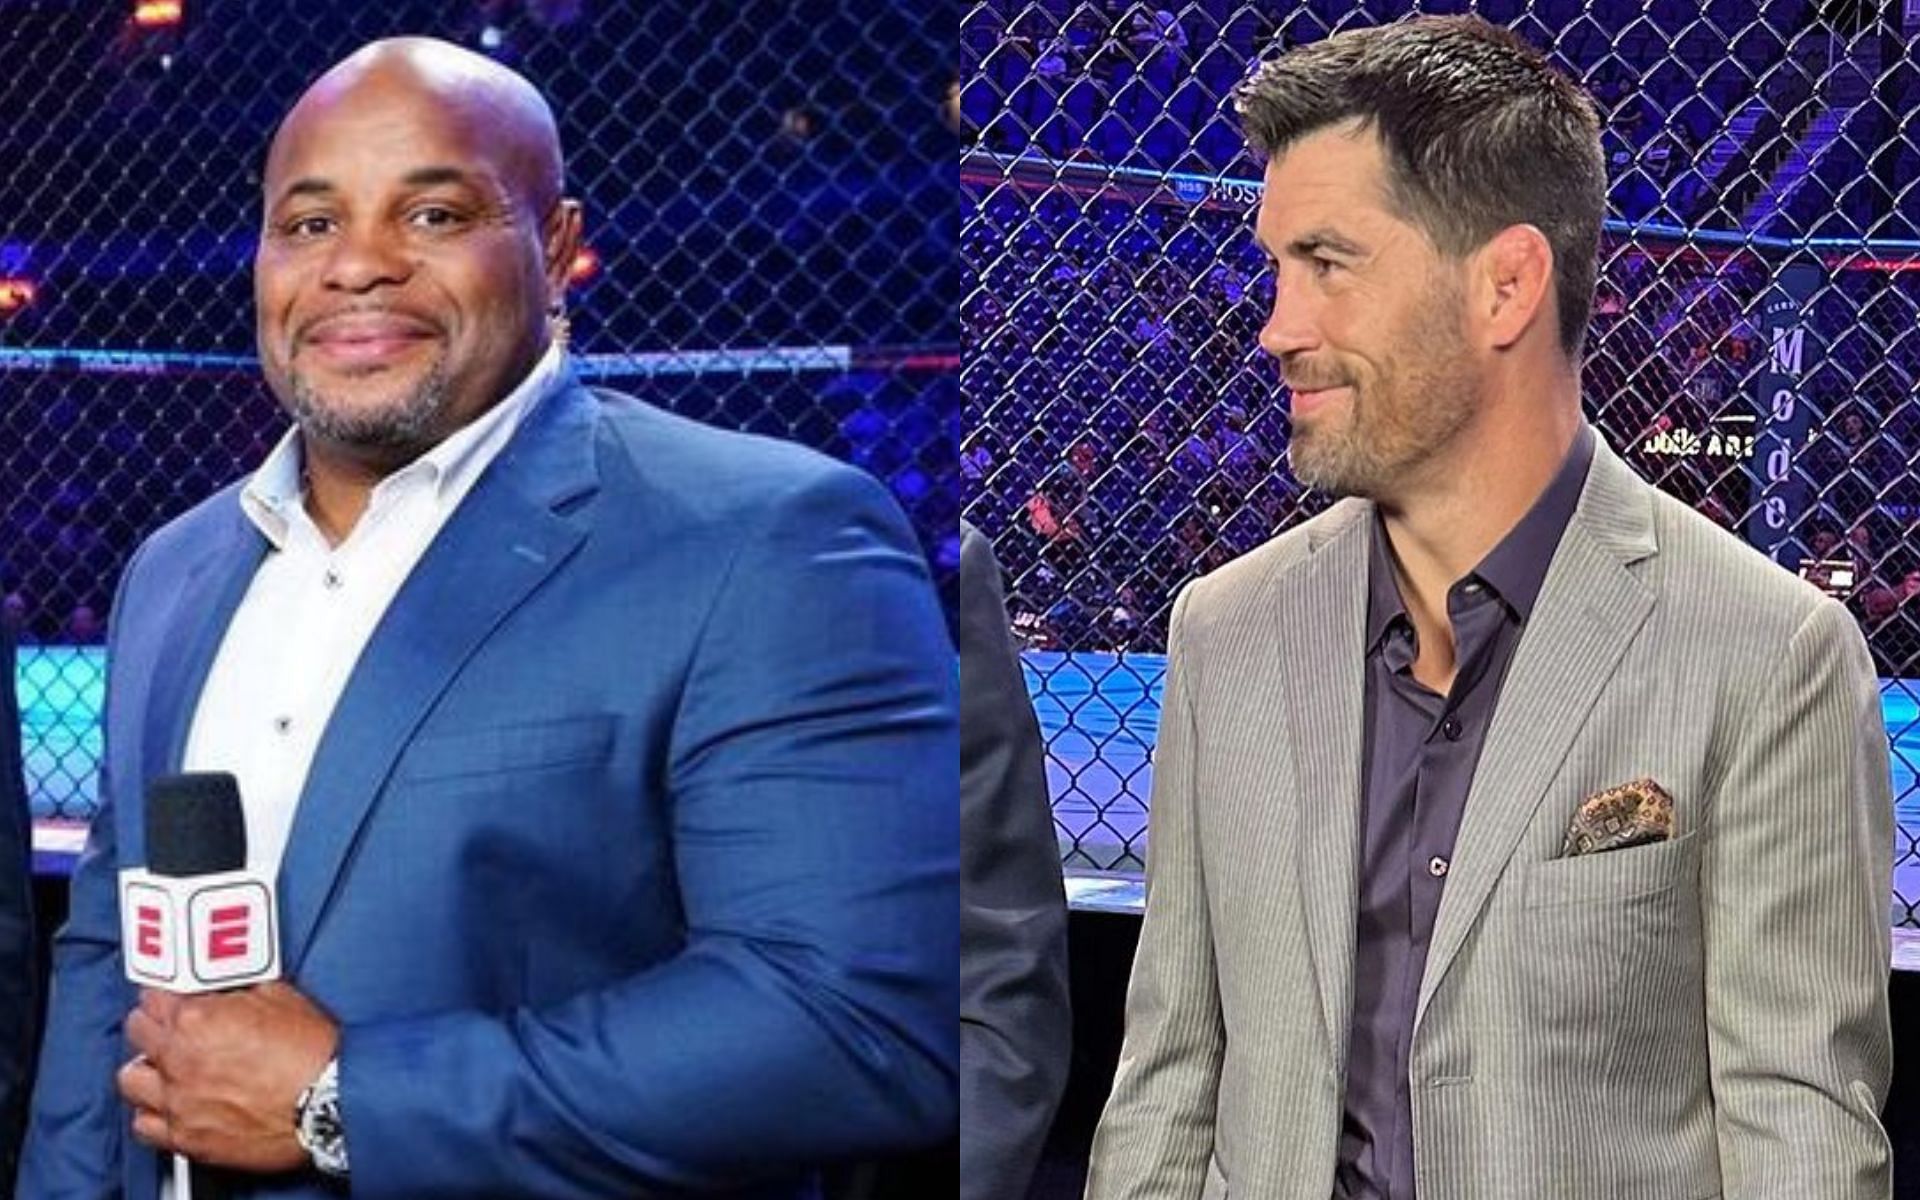 Daniel Cormier (left) and Dominick Cruz (right) to commentate at UFC Vegas 86 [Image courtesy @dc_mma and @dominickcruz on Instagram]